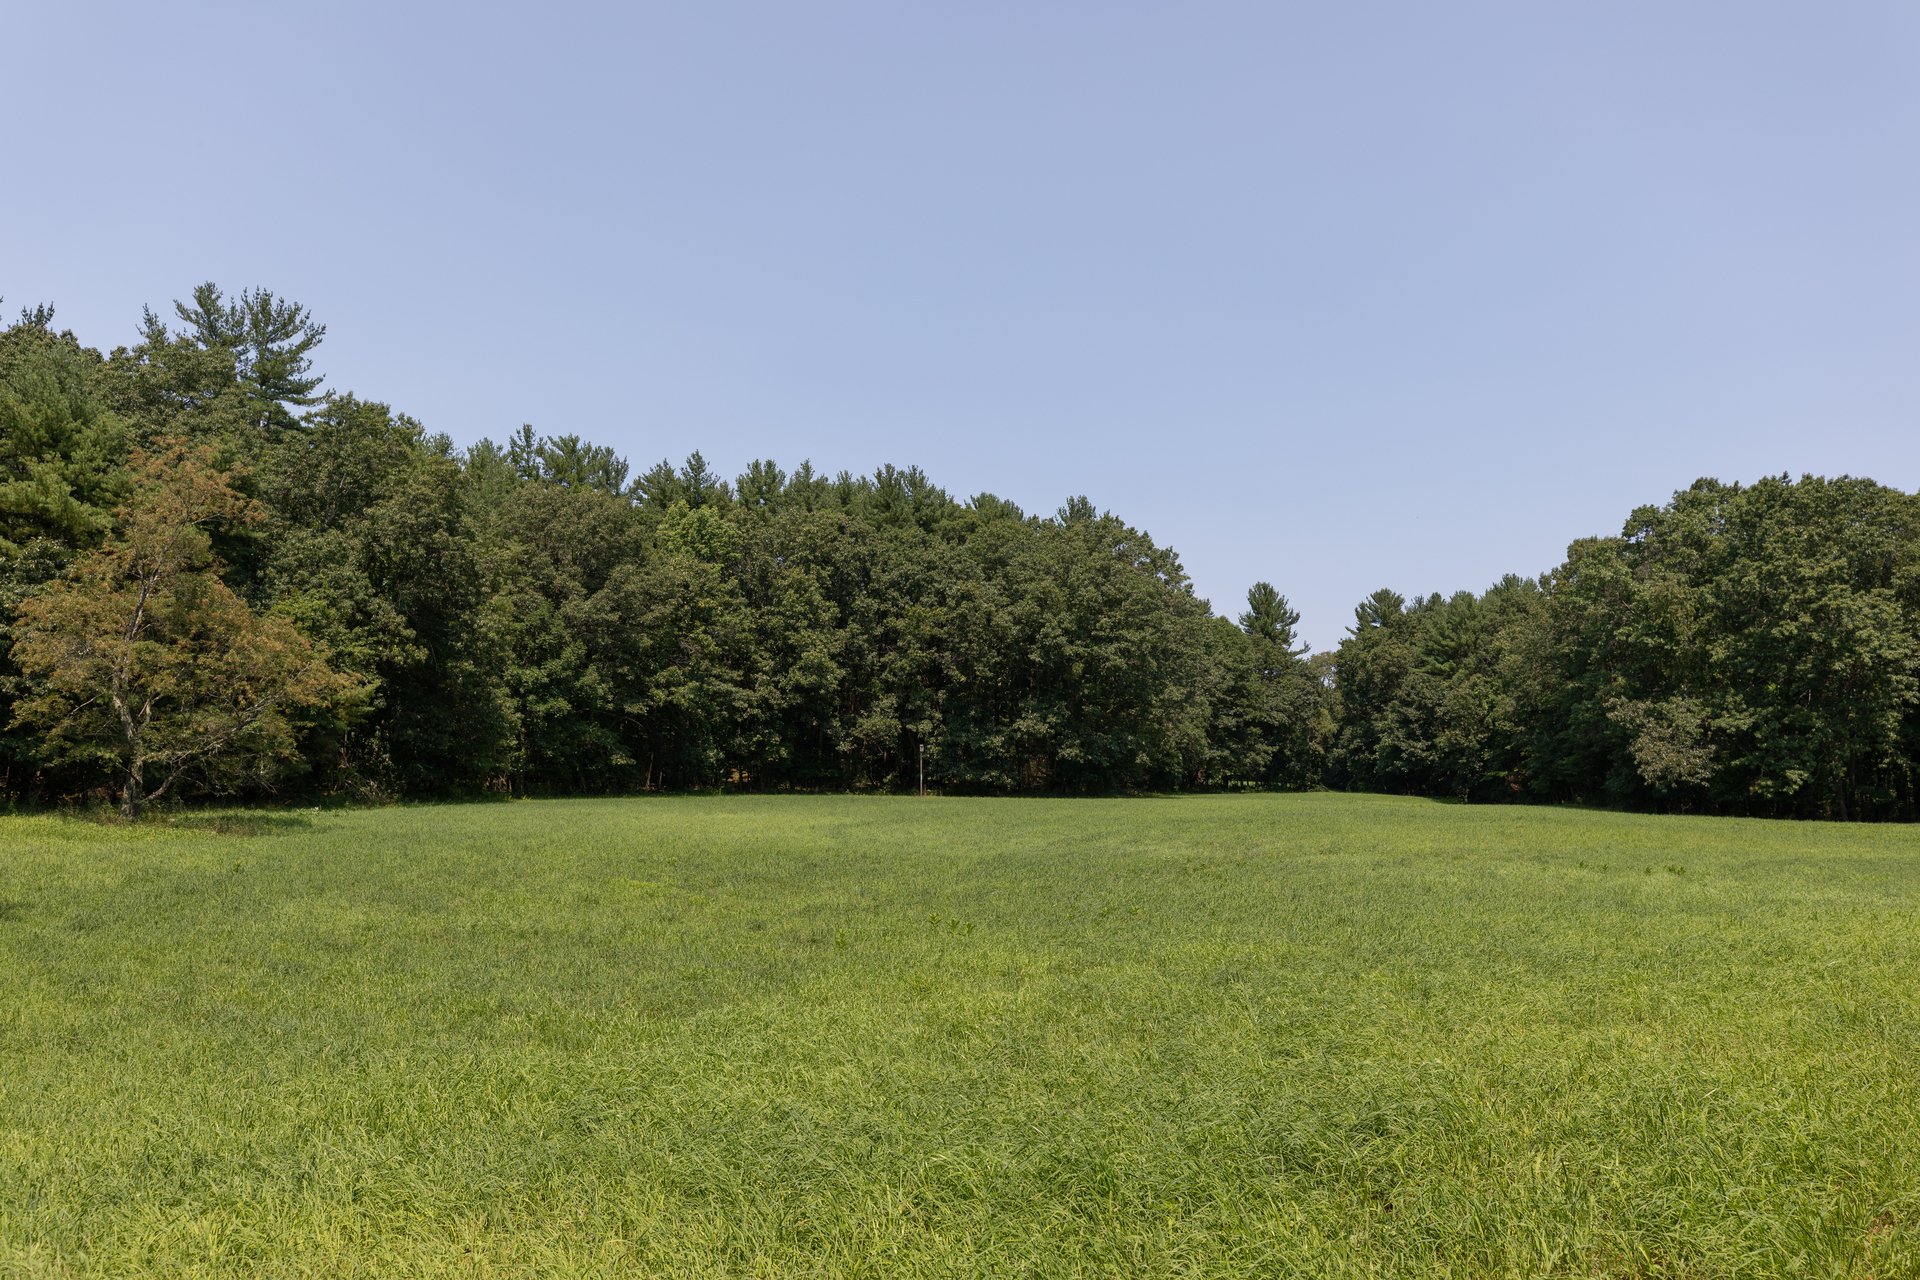 A green meadow with short grass surrounded by dark green, full trees.